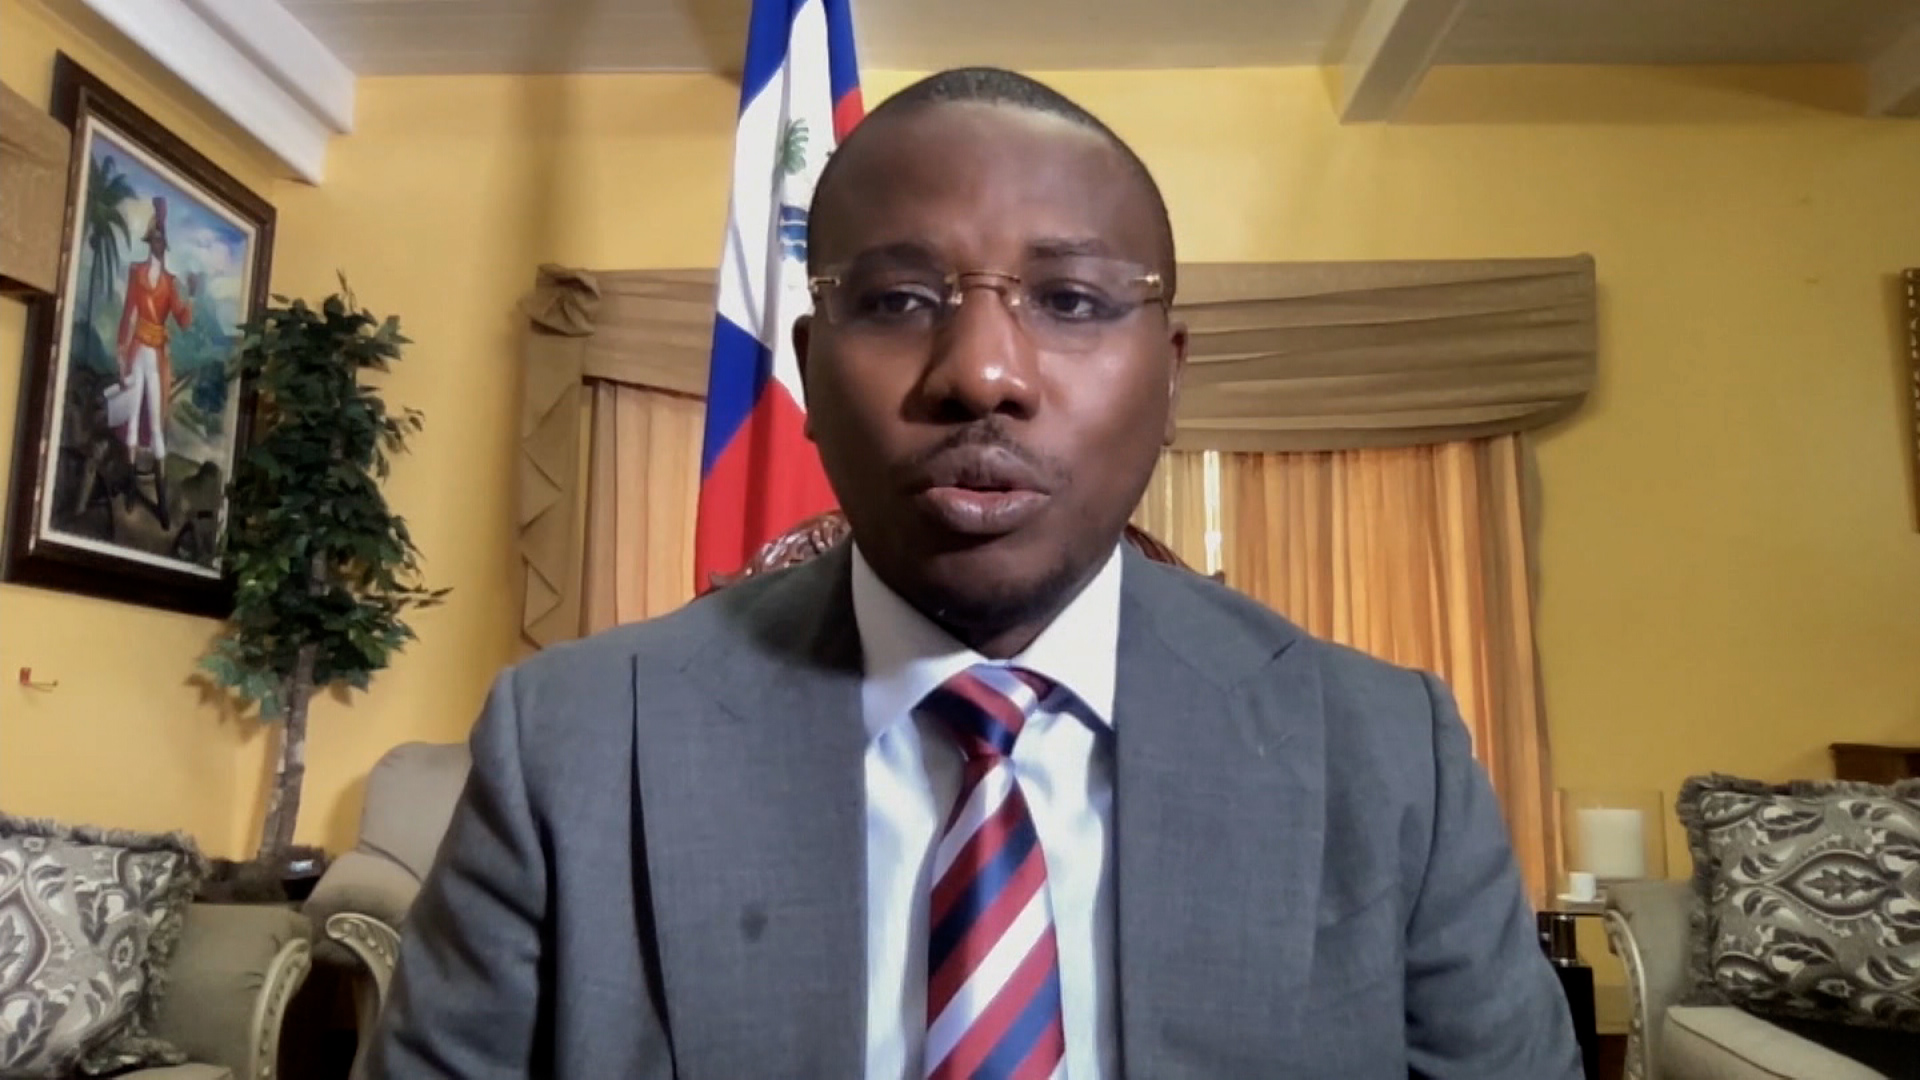 Acting Haitian Prime Minister Claude Joseph speaks during an interview on July 8.